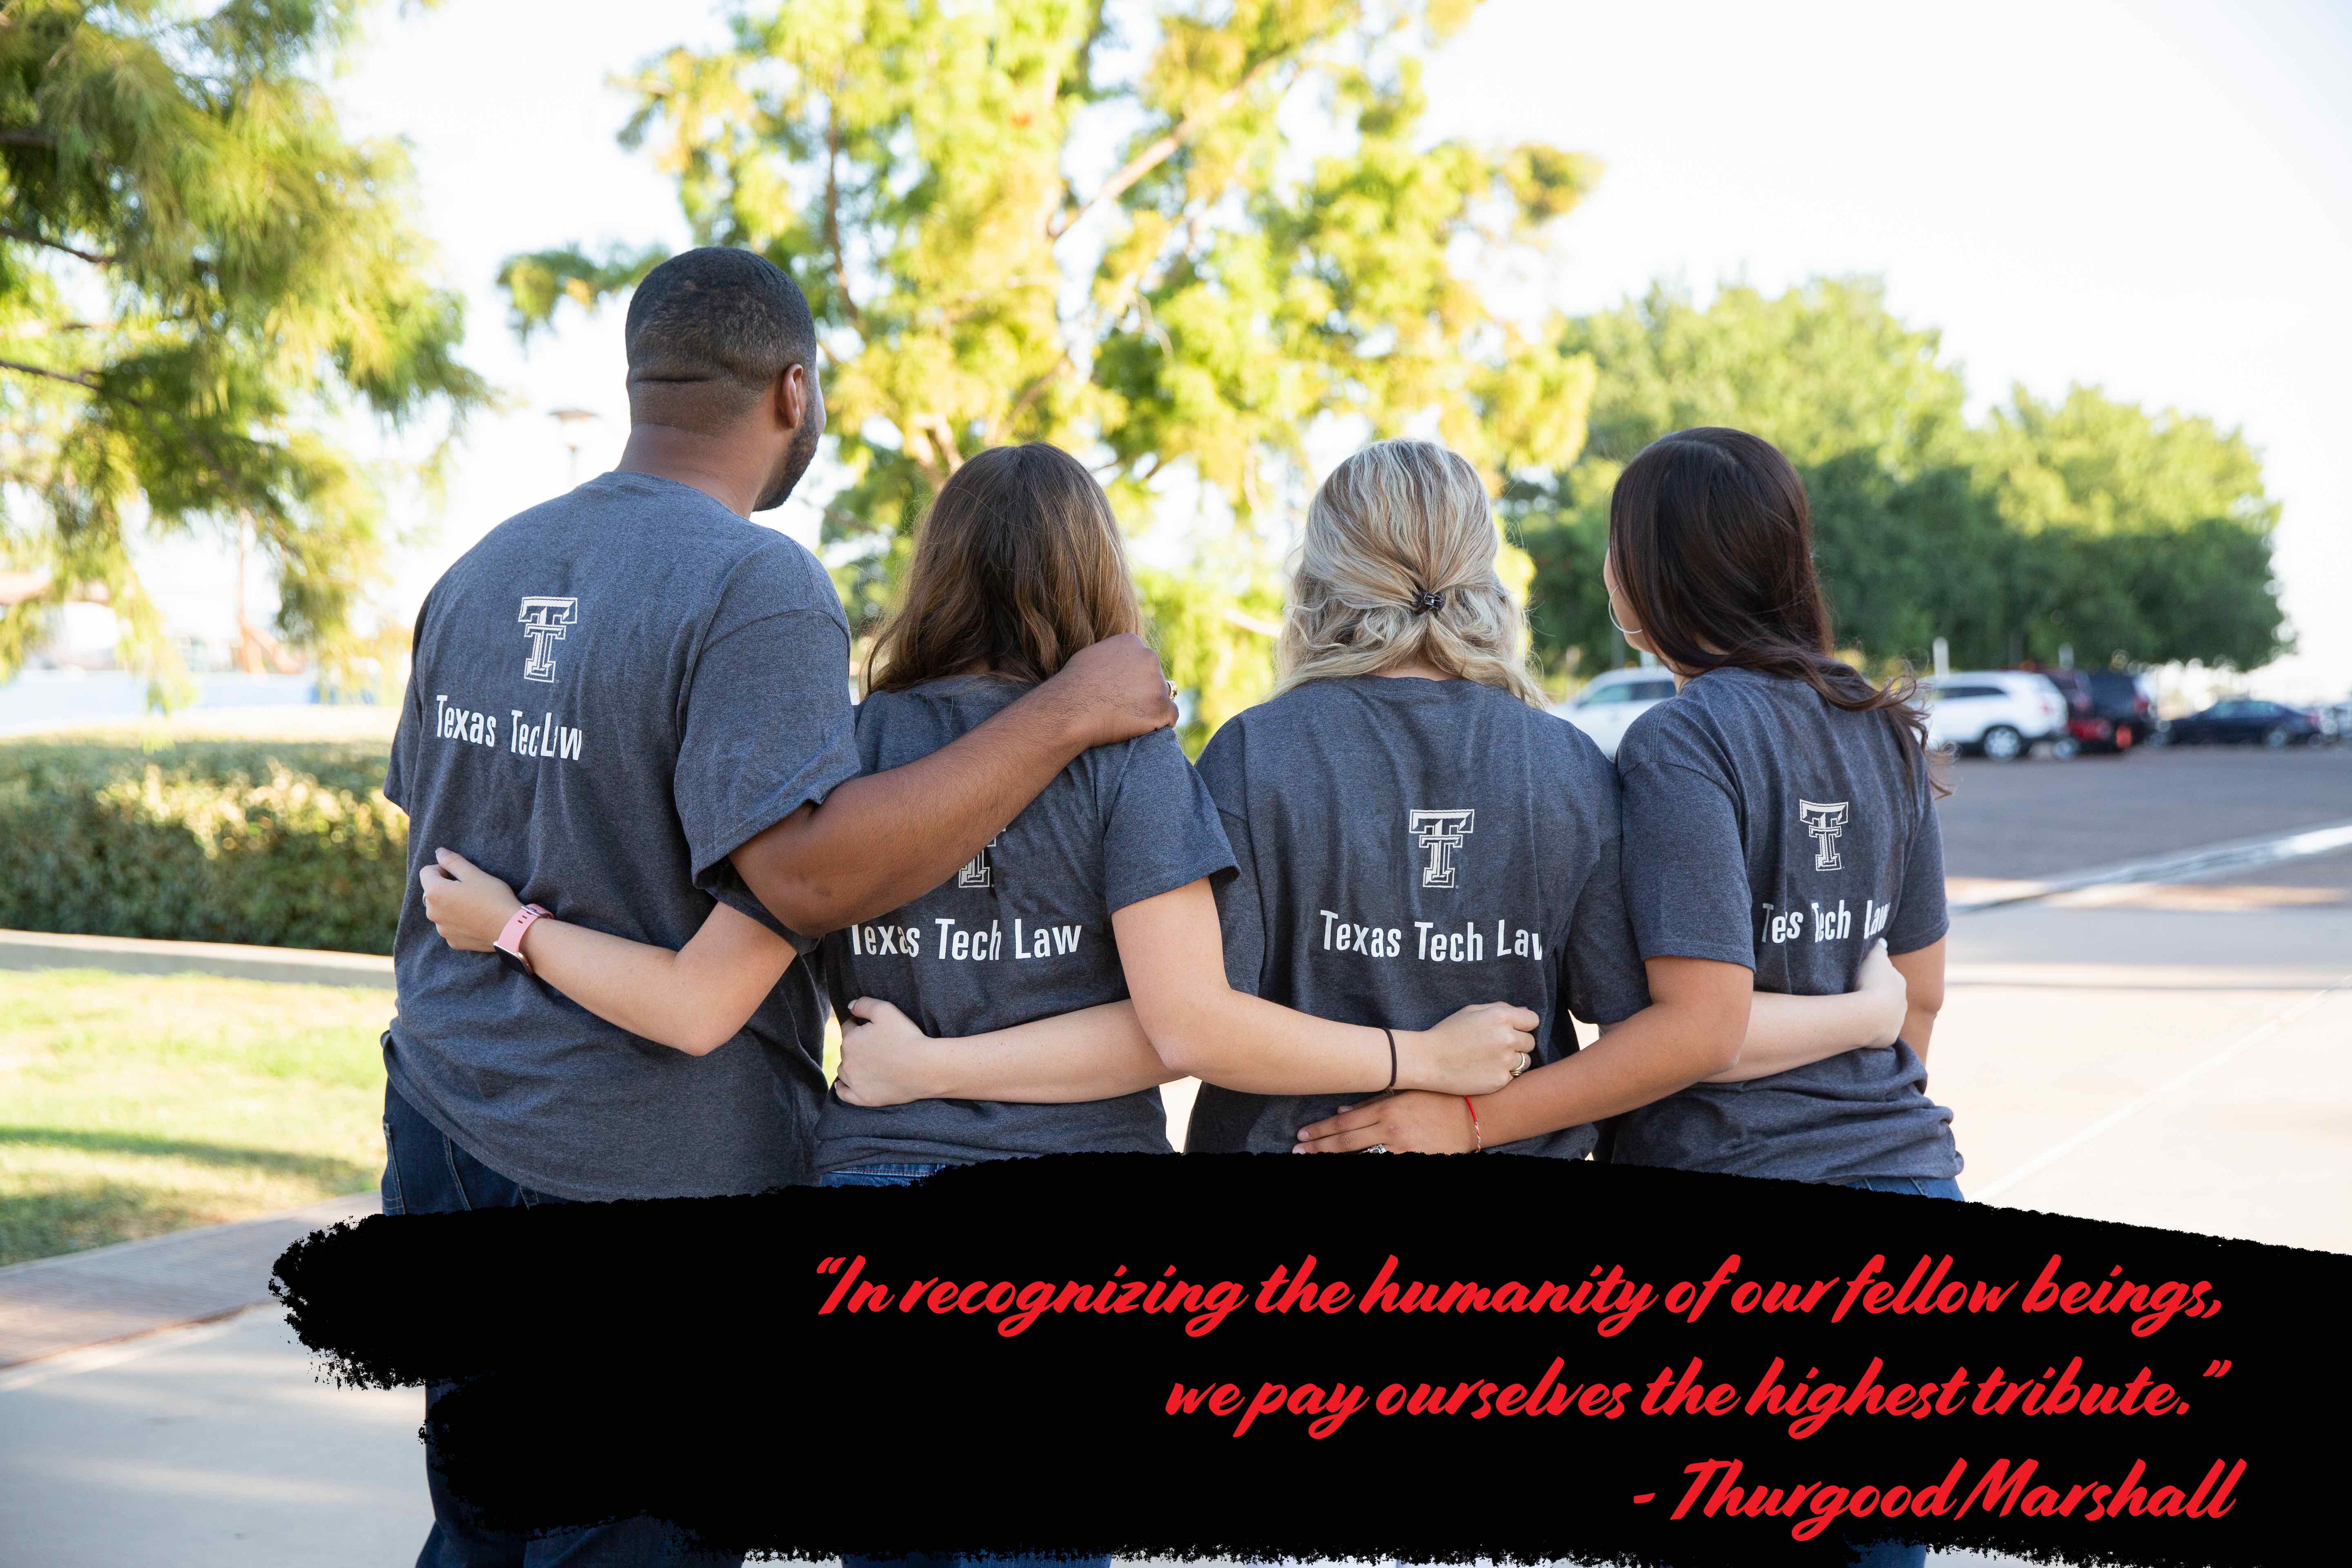 Image of four students standing together with the text: "'In recognizing the humanity of our fellow beings, we pay ourselves the highest tribute.'  - Thurgood Marshall"